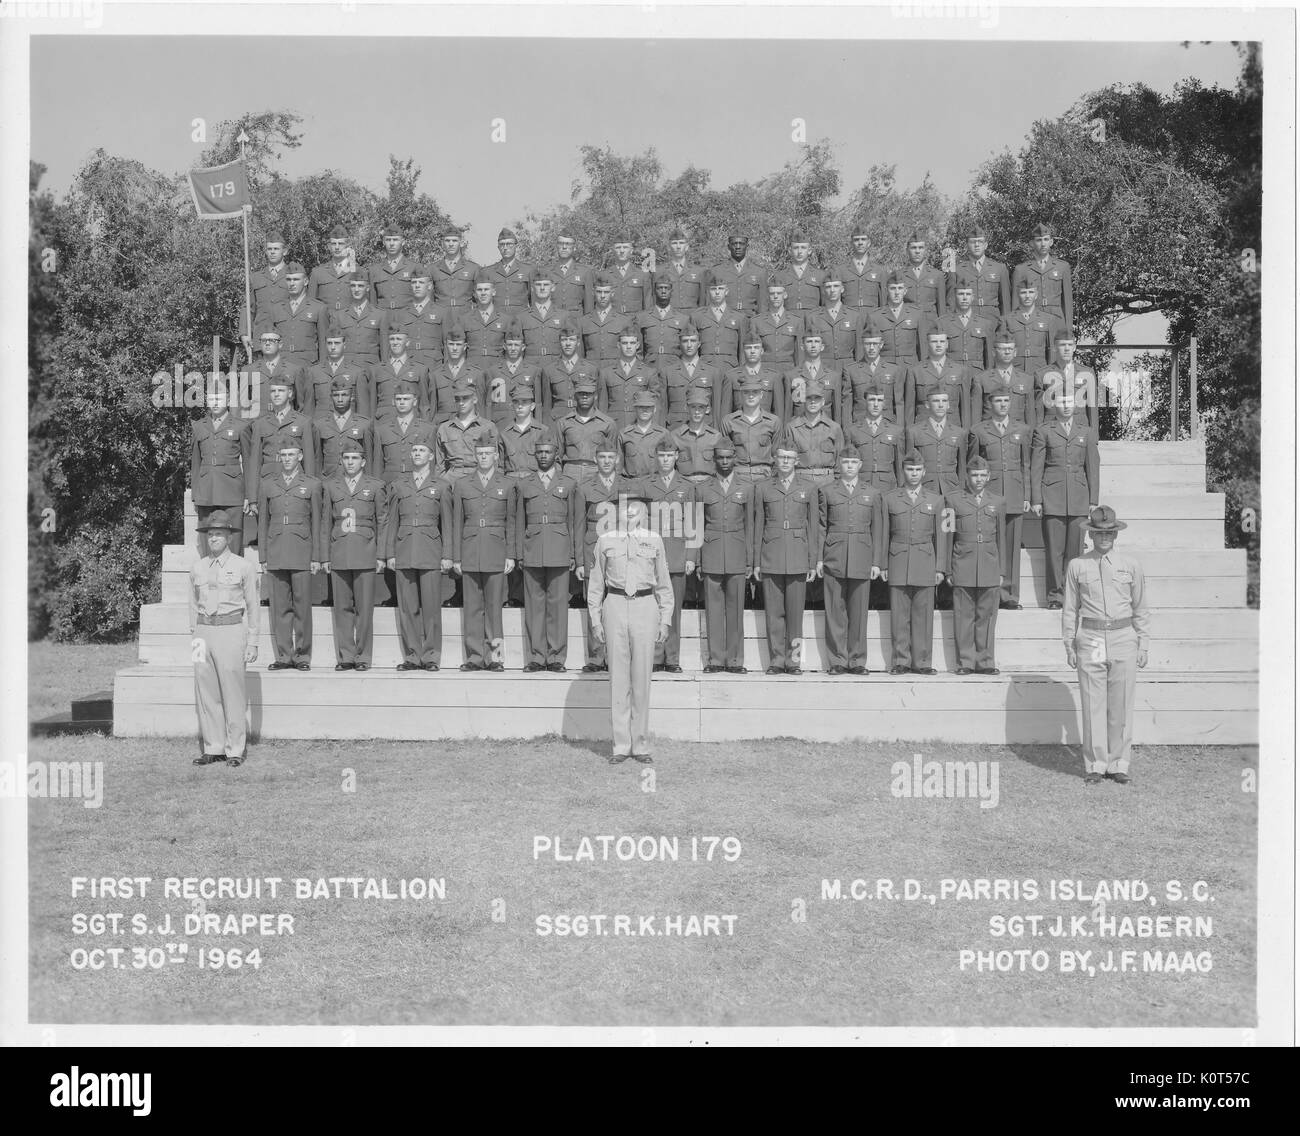 A photograph of Platoon 179 in training with the 1st Recruit Battalion, they are newly enlisted personnel with the United States Marine Corps, they are posing with two sergeants and a staff sergeant, Parris Island, South Carolina, October 30, 1964. Stock Photo